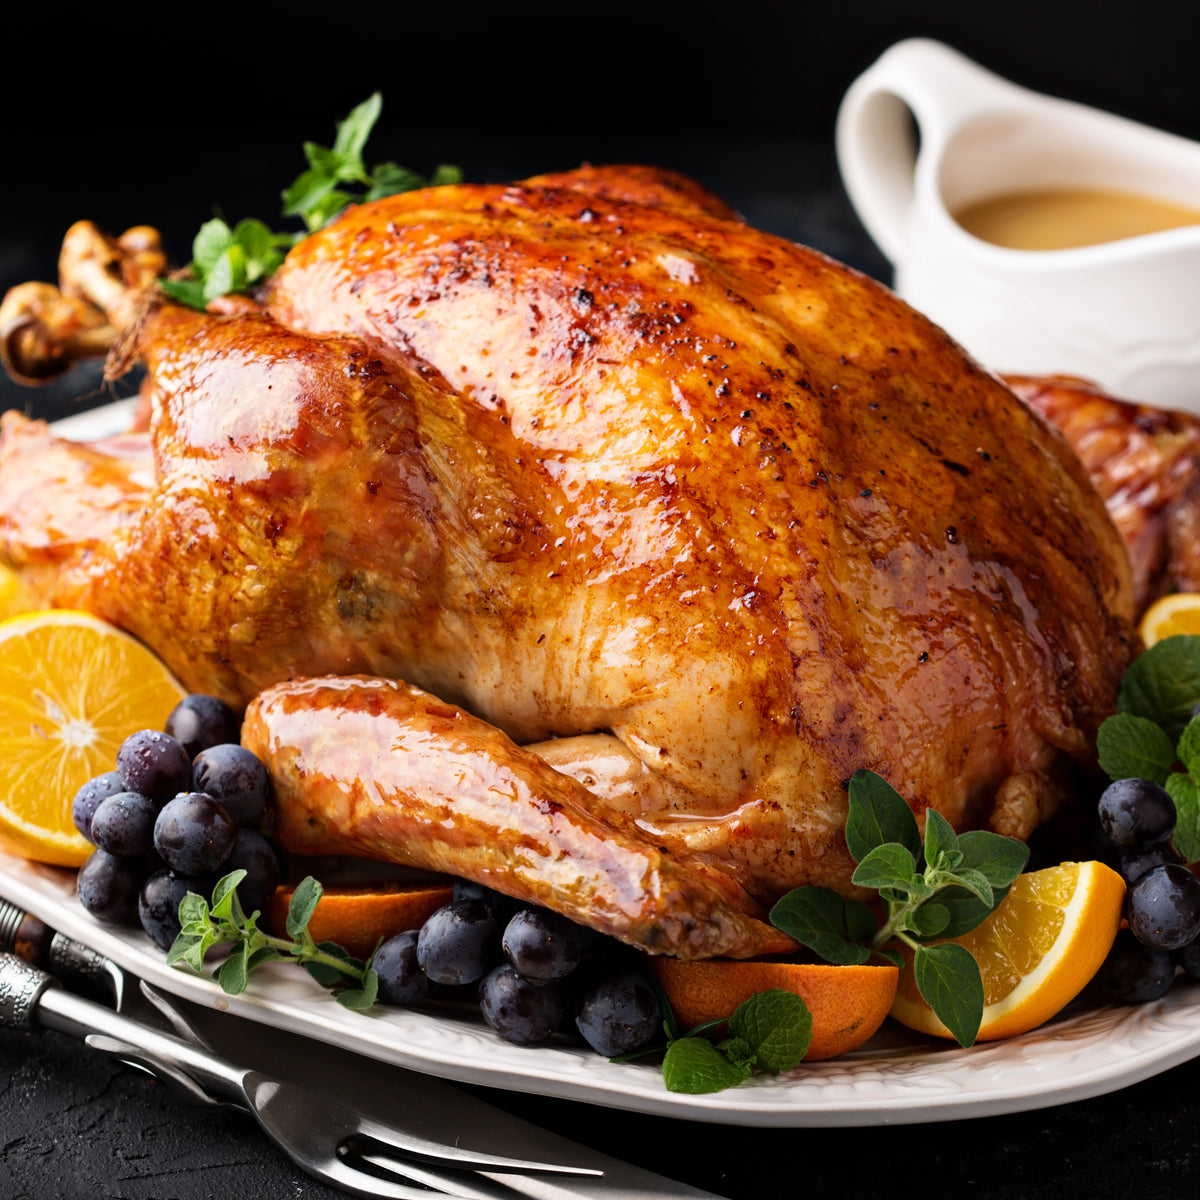 Roasted Whole Turkey, 4kg with Garnish (Prepare Hot Only) - Presented on a Ceramic Platter Plate - served up to 14 persons